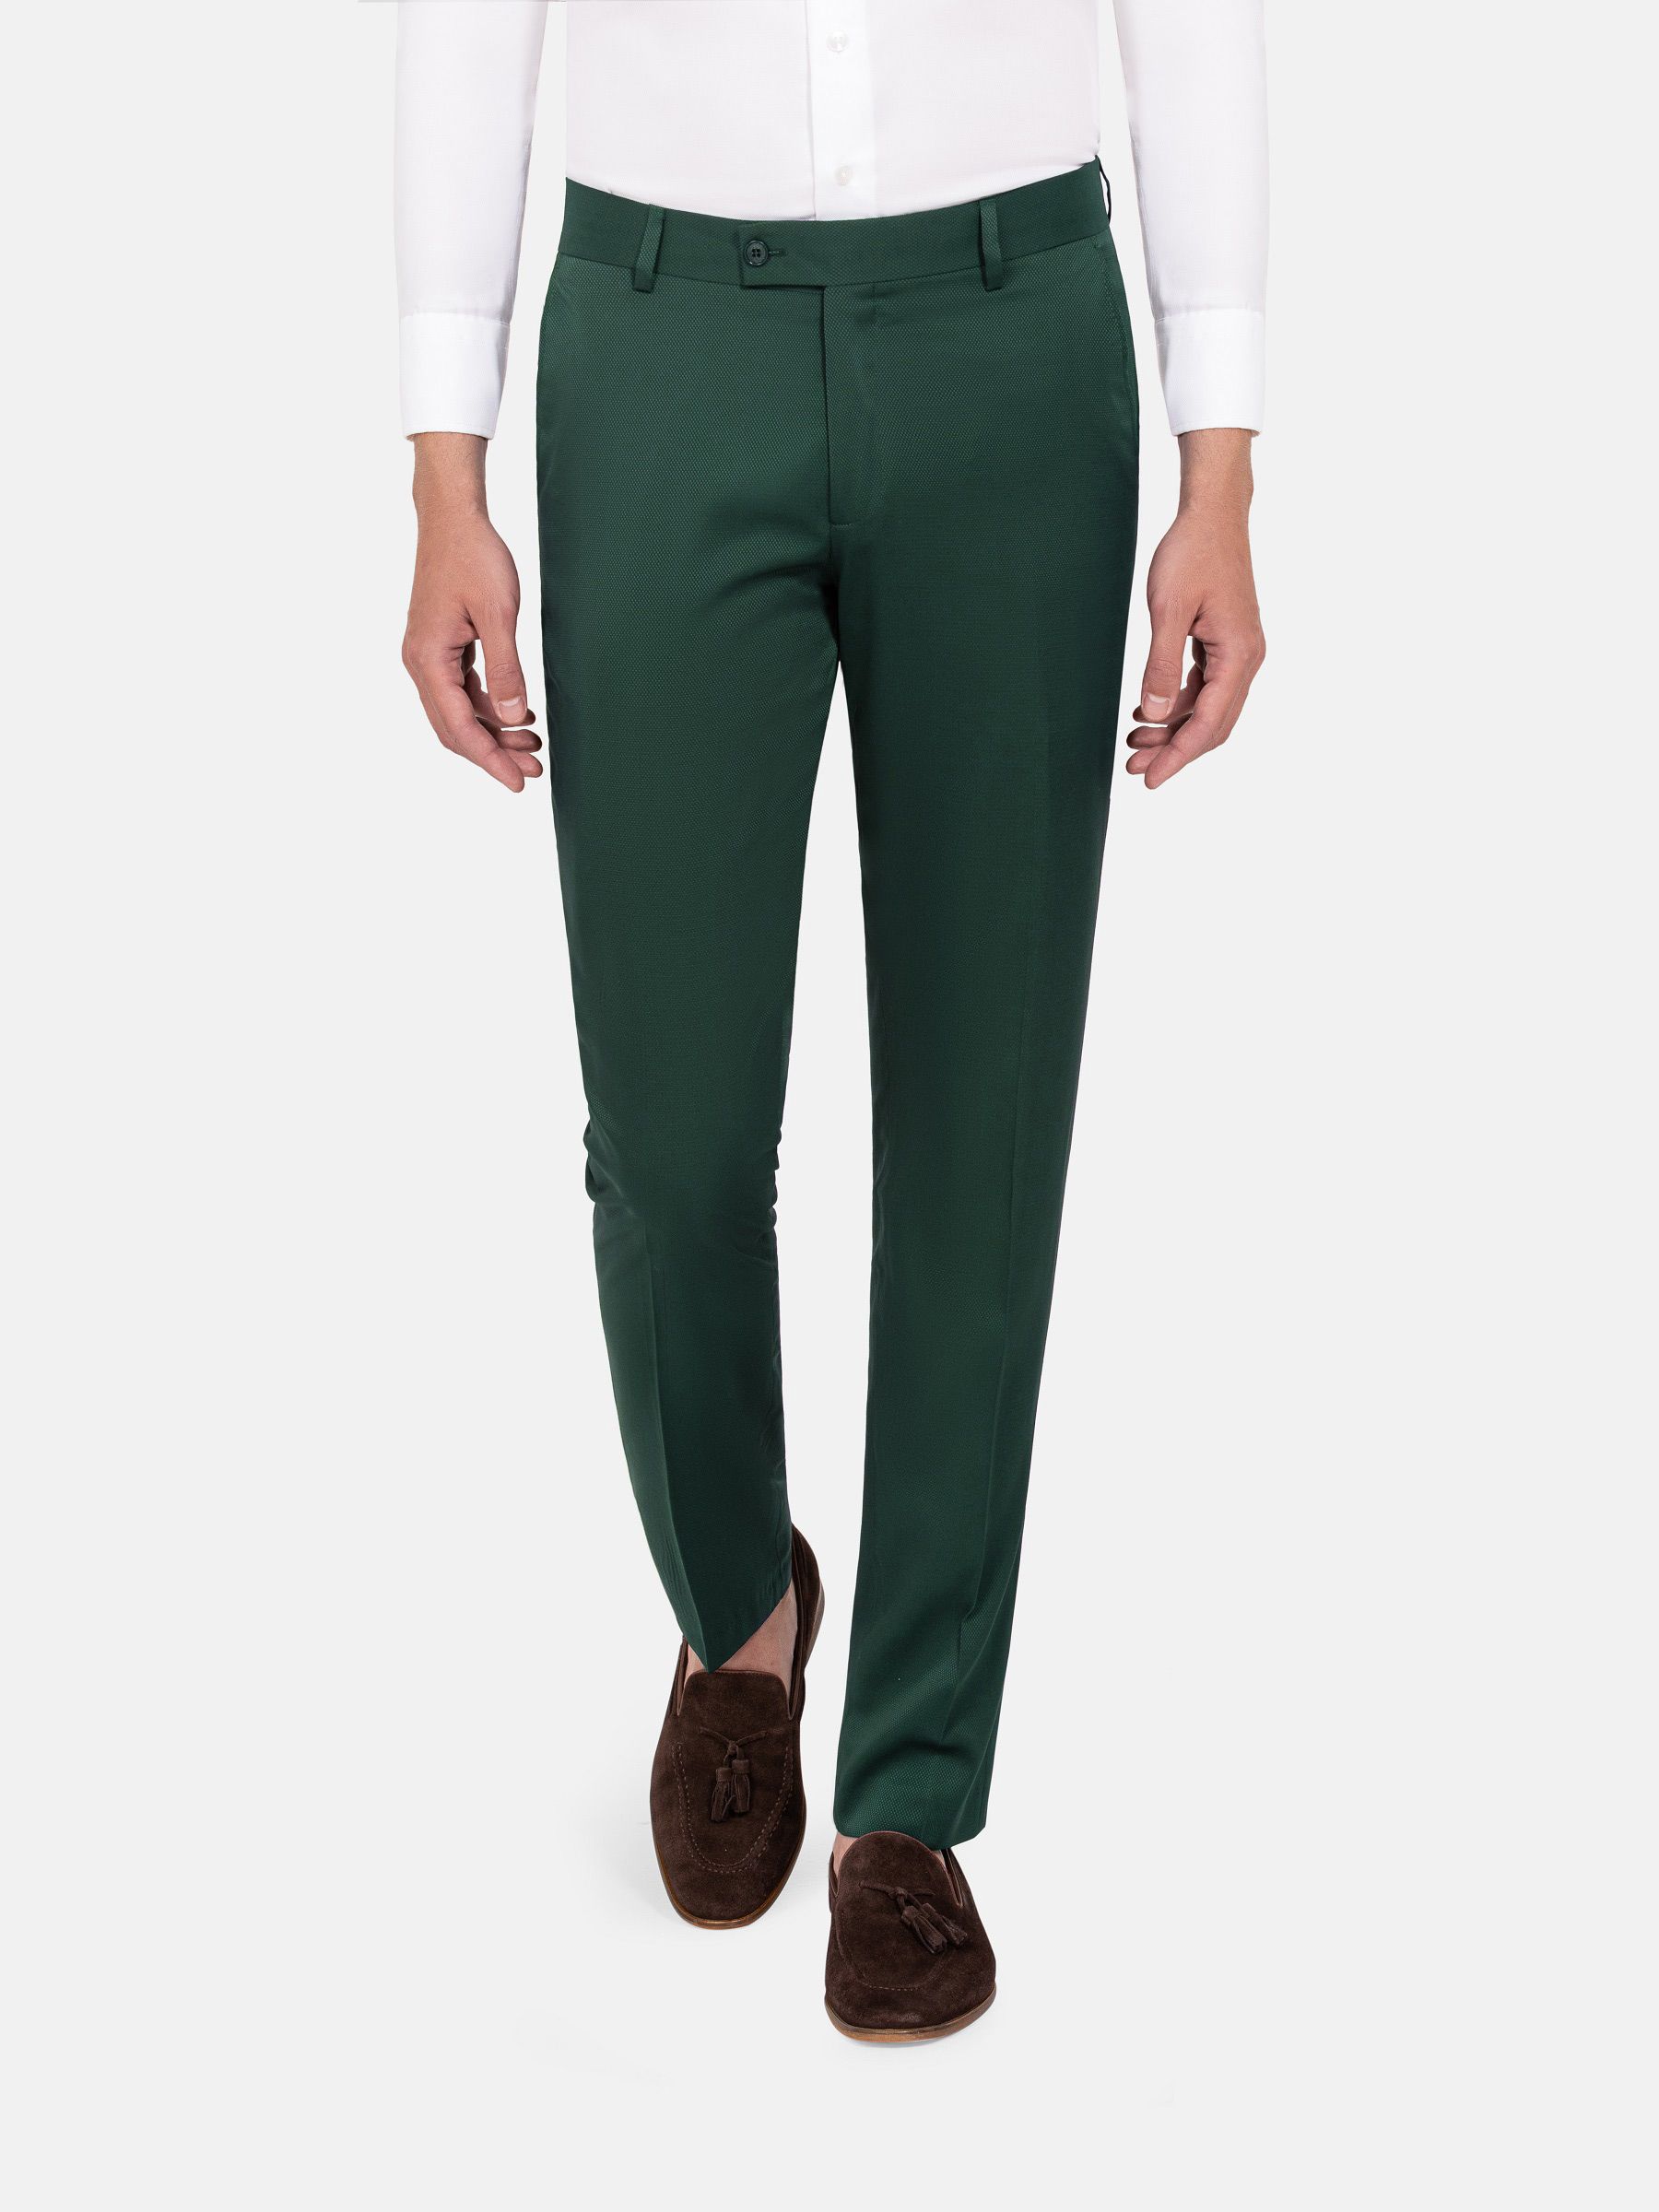 Buy MENS STYLISH MILITRAY GREEN SLIM FIT FORMAL TROUSER Online In India At  Discounted Prices